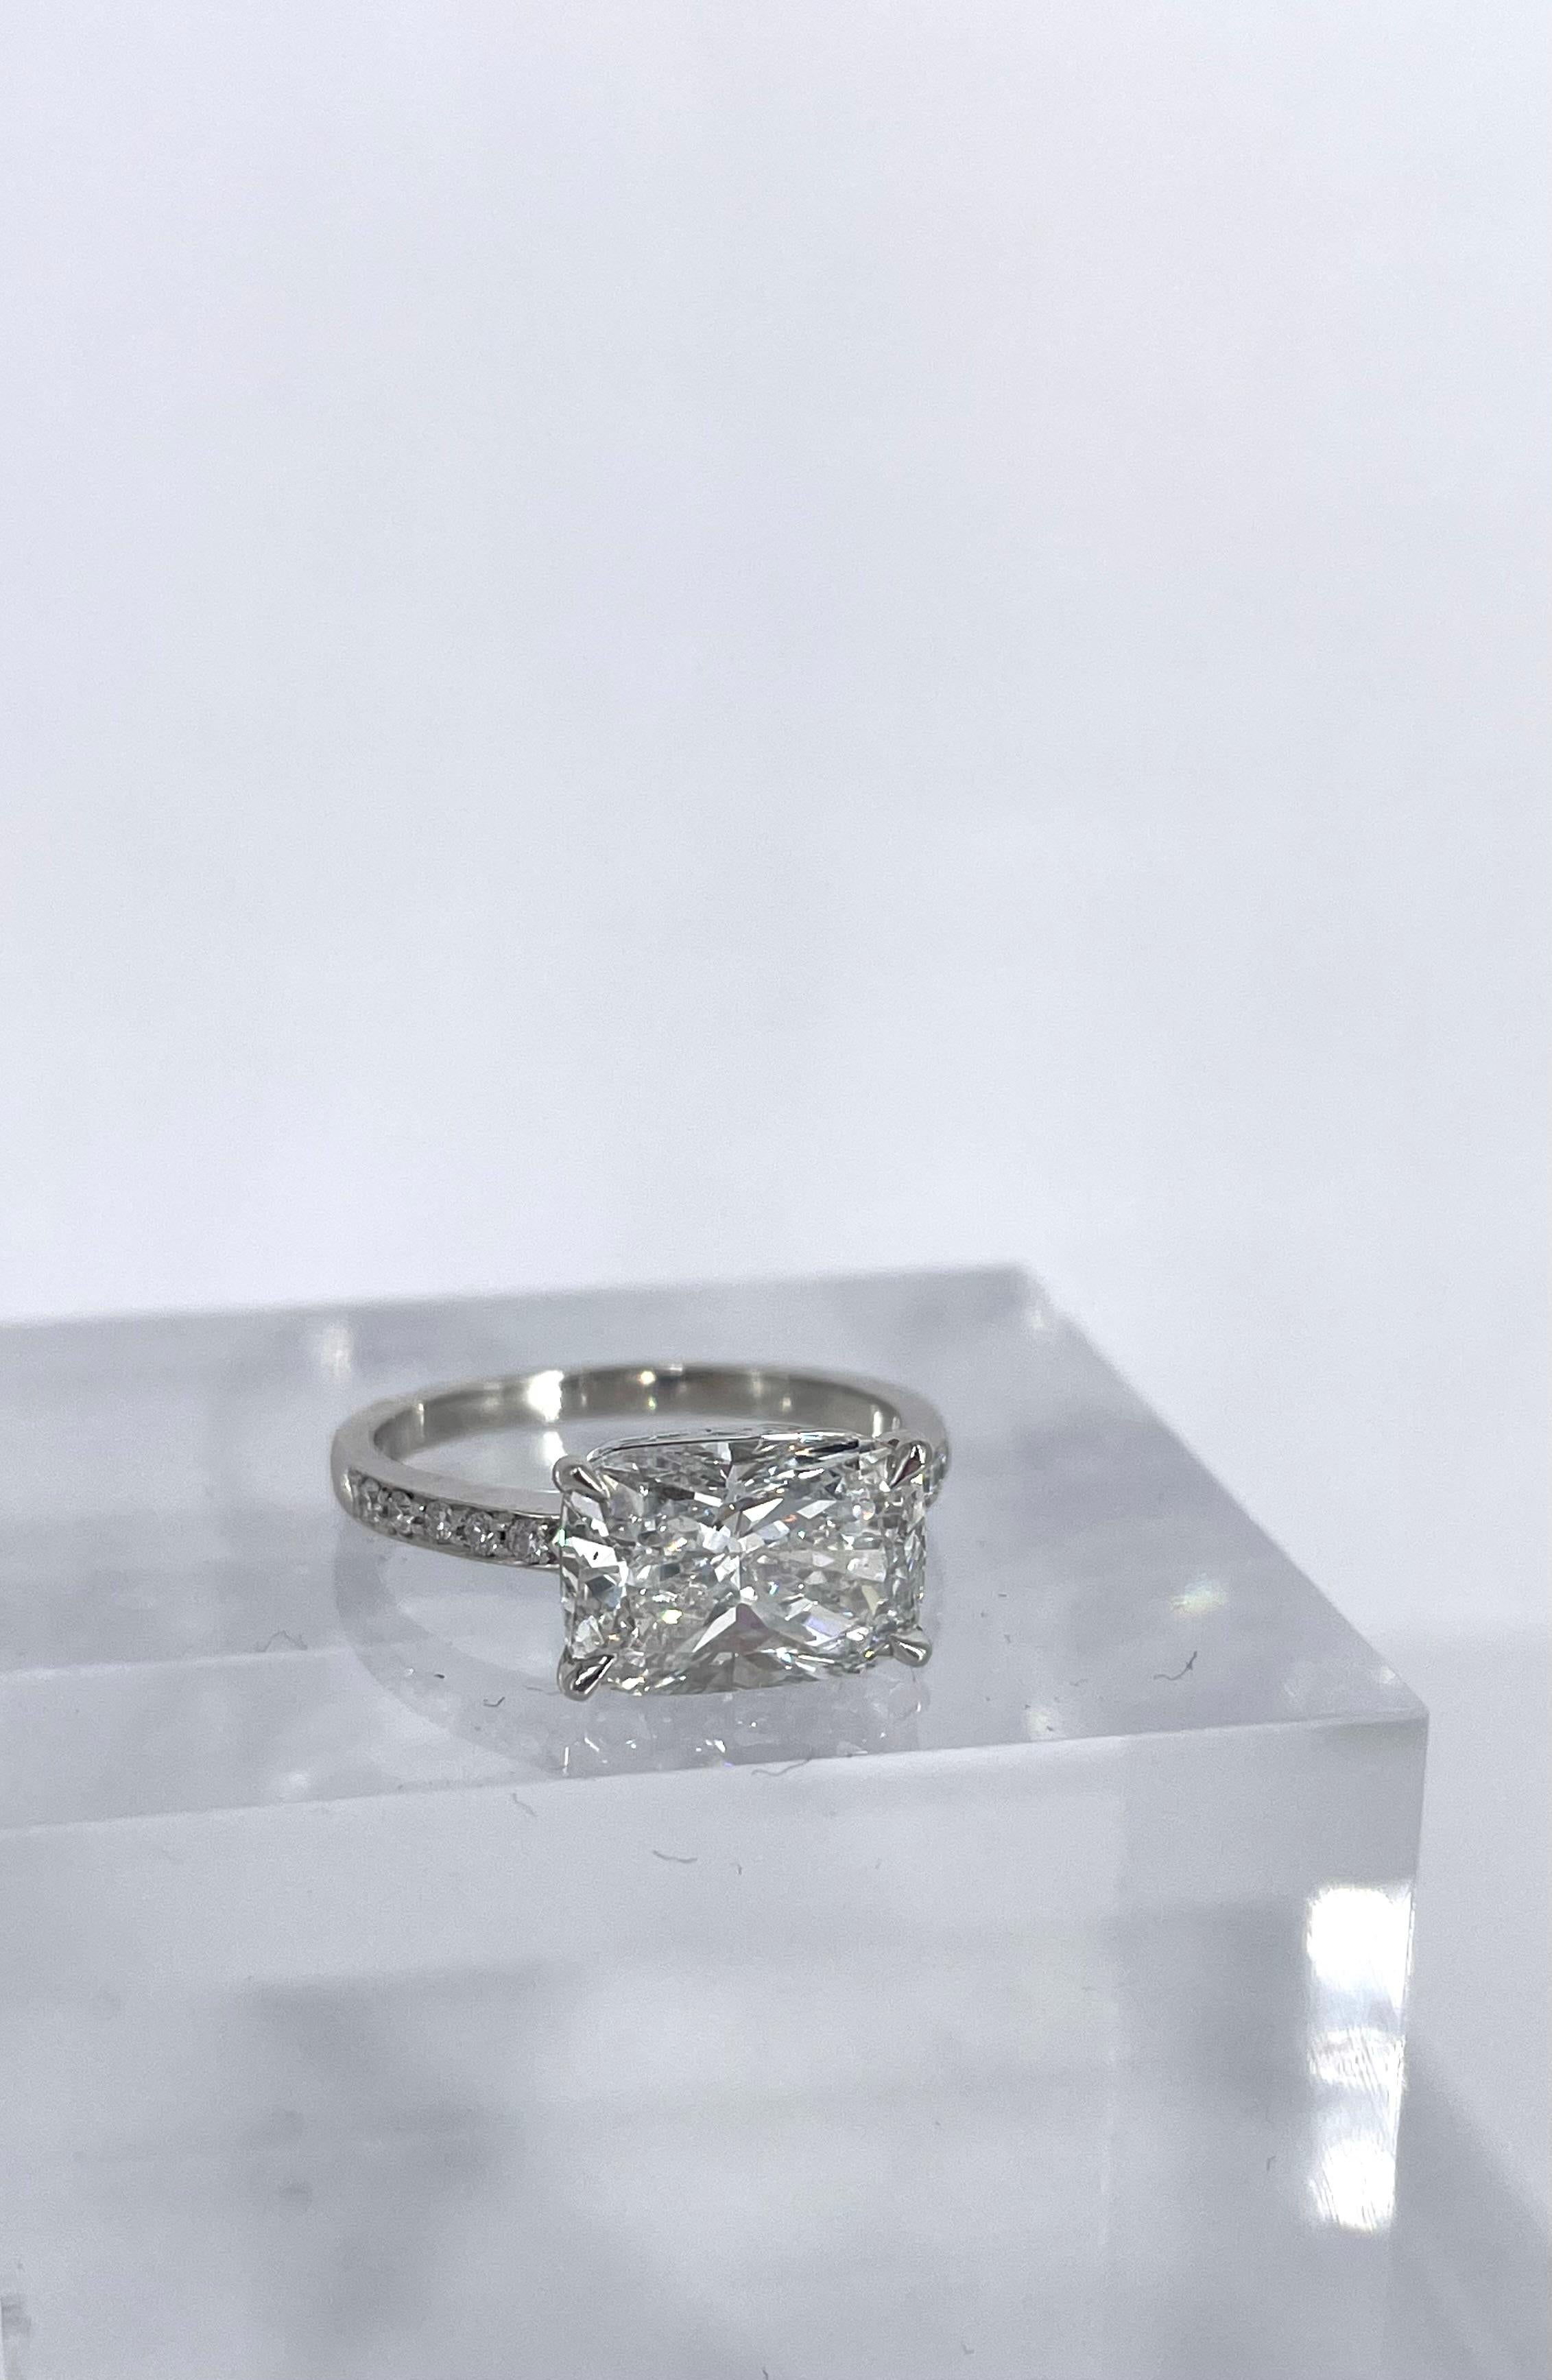 This east-west pave solitaire engagement ring is a unique combination of Art Deco touches and contemporary flair. The center diamond is an exceptionally elongated cushion, certified by the GIA to be 3.01 carats, E color and SI1 clarity. Crafted in